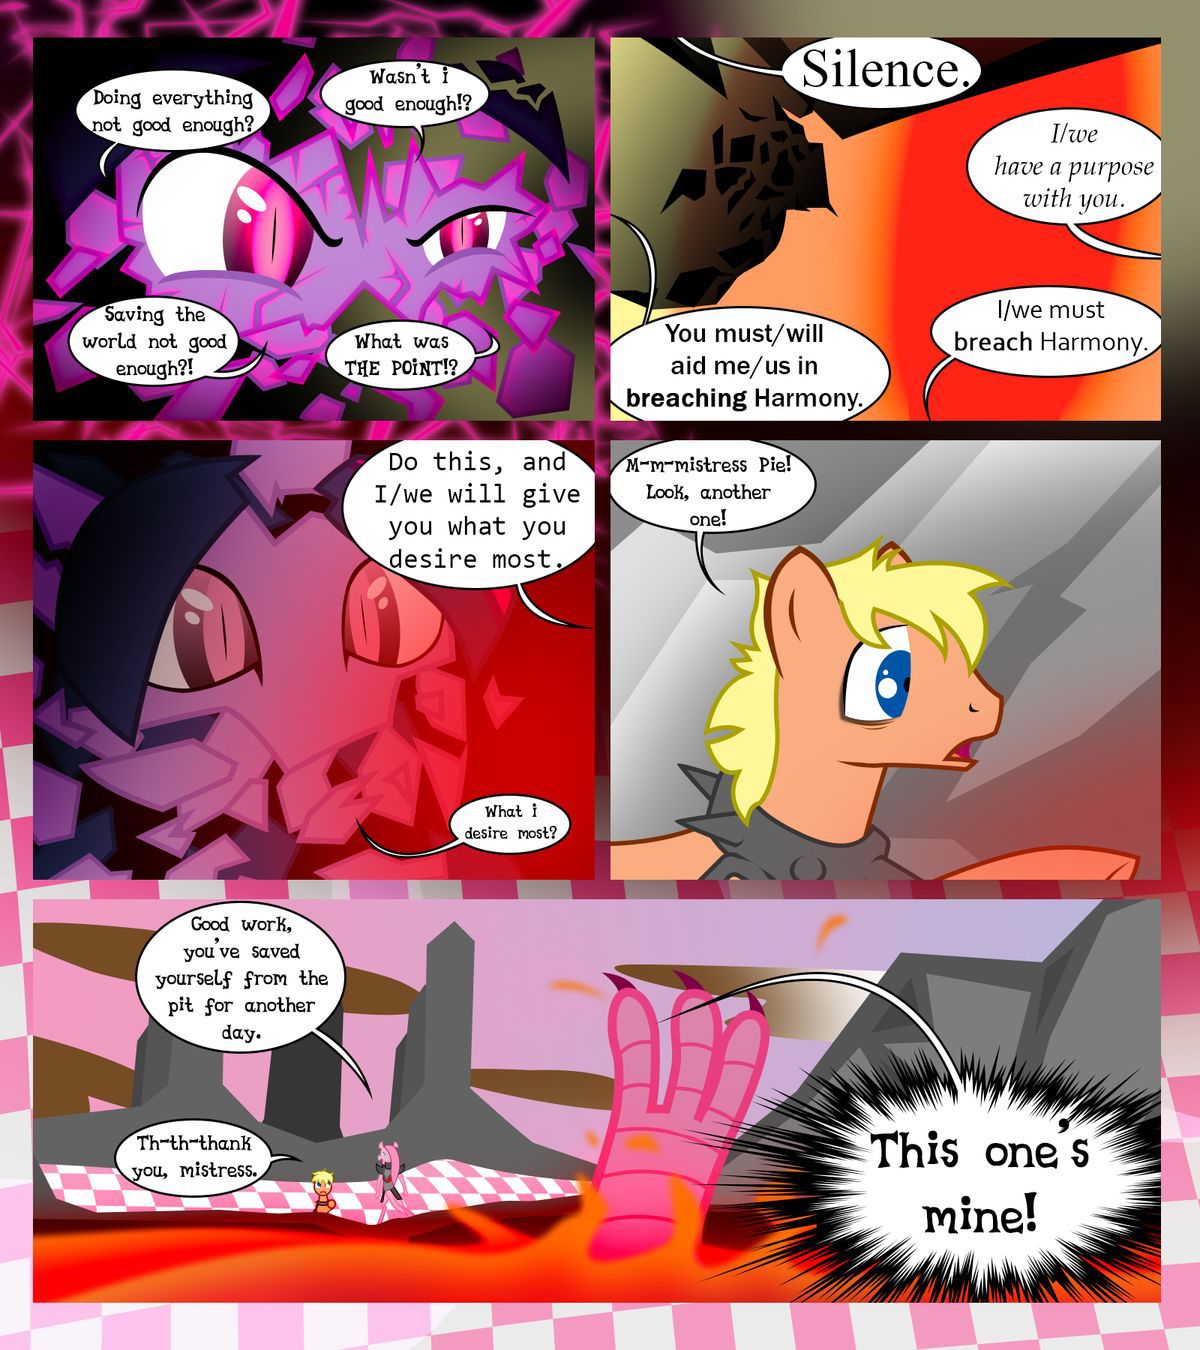 [GatesMcCloud] Cutie Mark Crusaders 10k: Chapter 3 - The Lost (My Little Pony: Friendship is Magic) [English] [Ongoing] 9